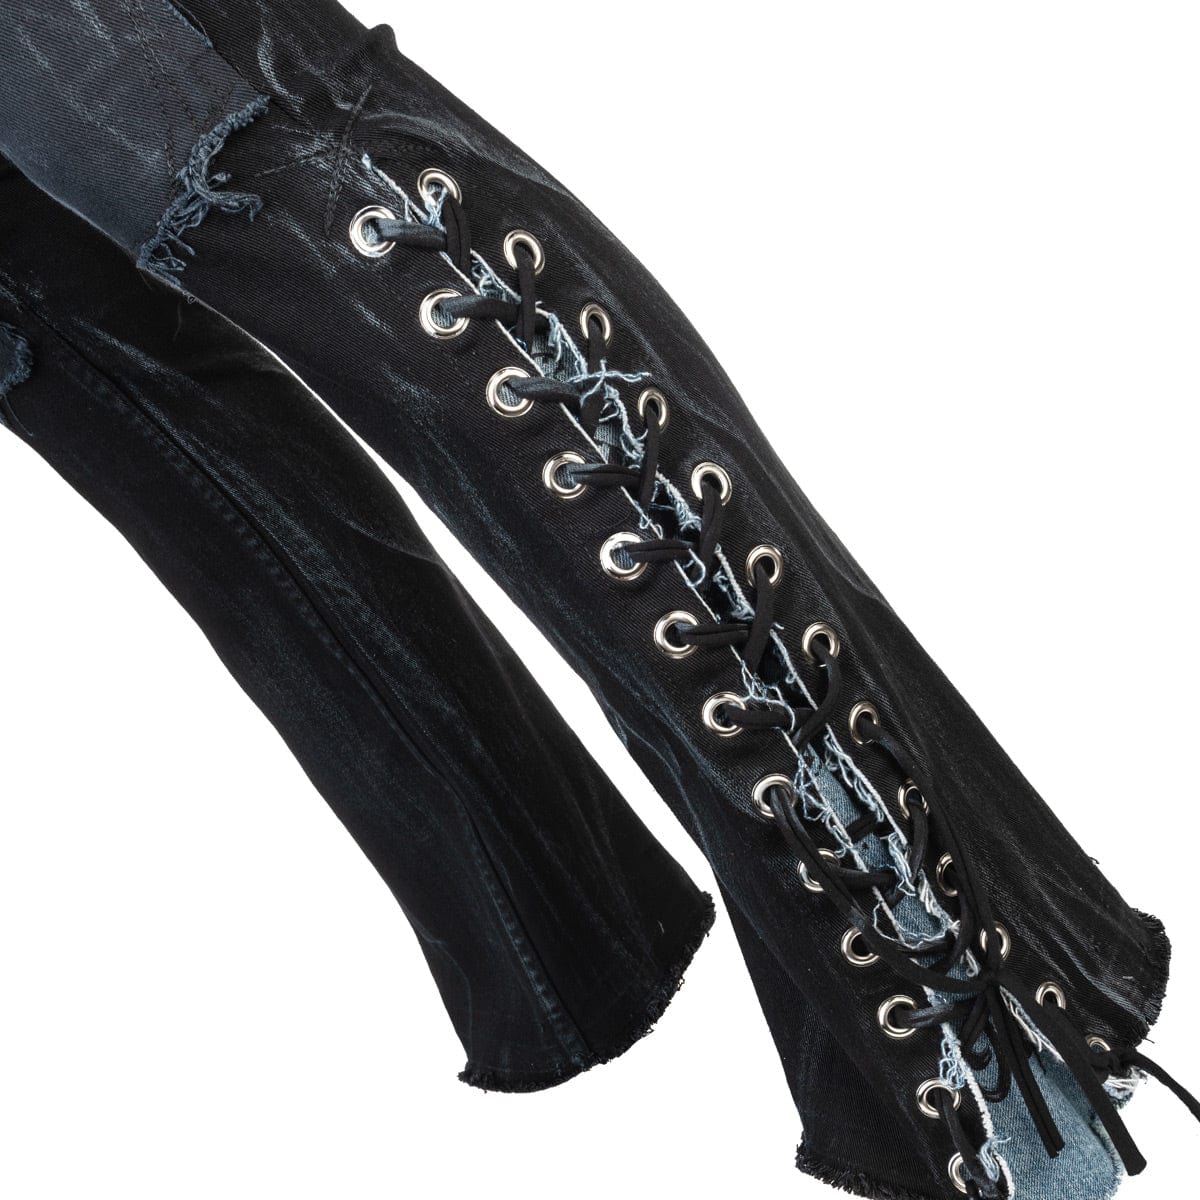 Custom Chop Shop Pants WORNSTAR CUSTOM JEANS - SKULL SPINES with lace-up fly